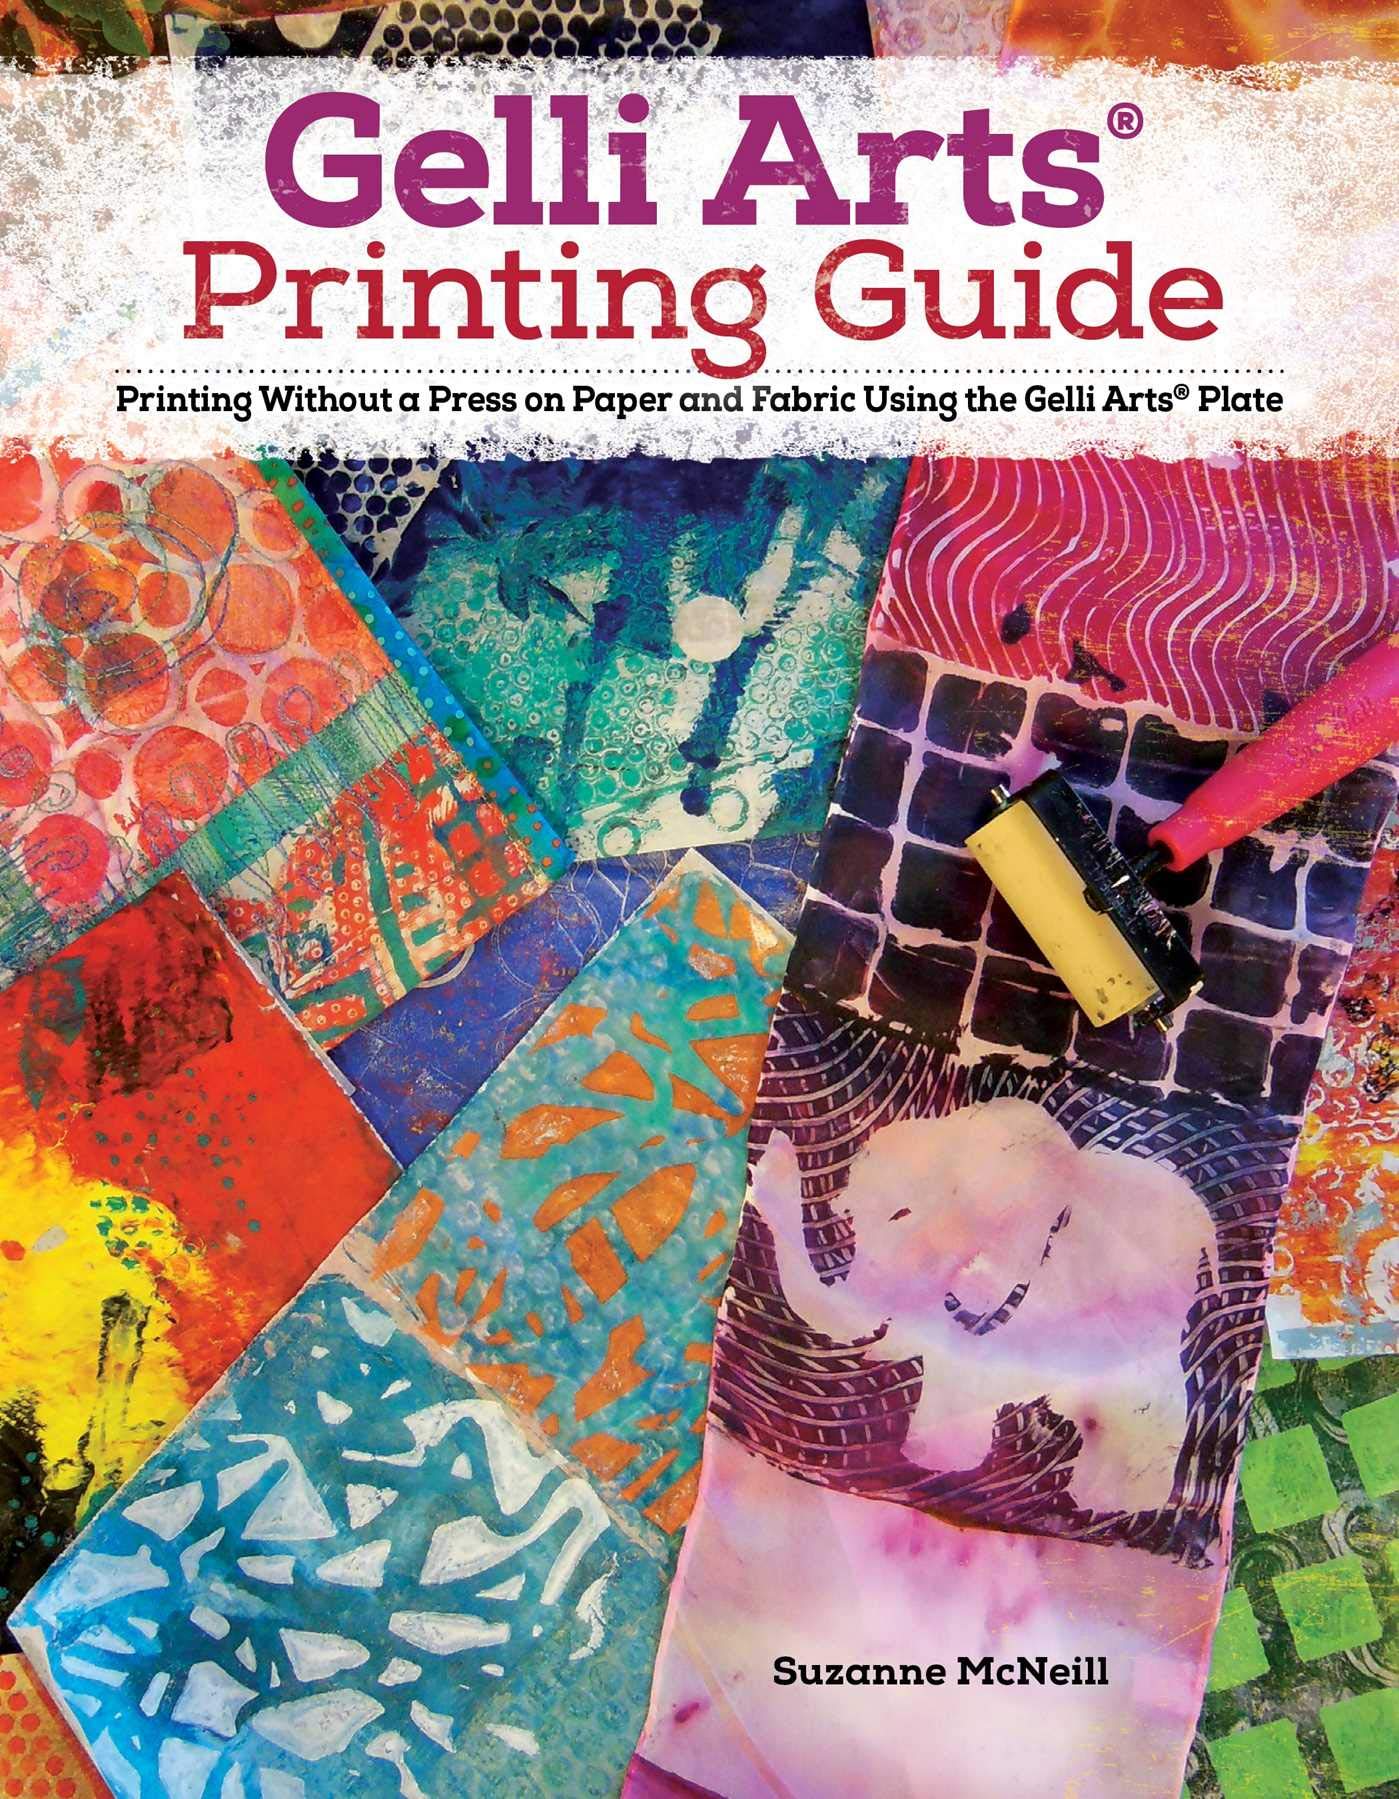 Gelli Arts (R) Printing Guide: Printing Without a Press on Paper and Fabric Using the Gelli Arts (R) Plate (Design Originals) 32 Beginner-Friendly Step-by-Step Projects, Techniques, and Inspiration